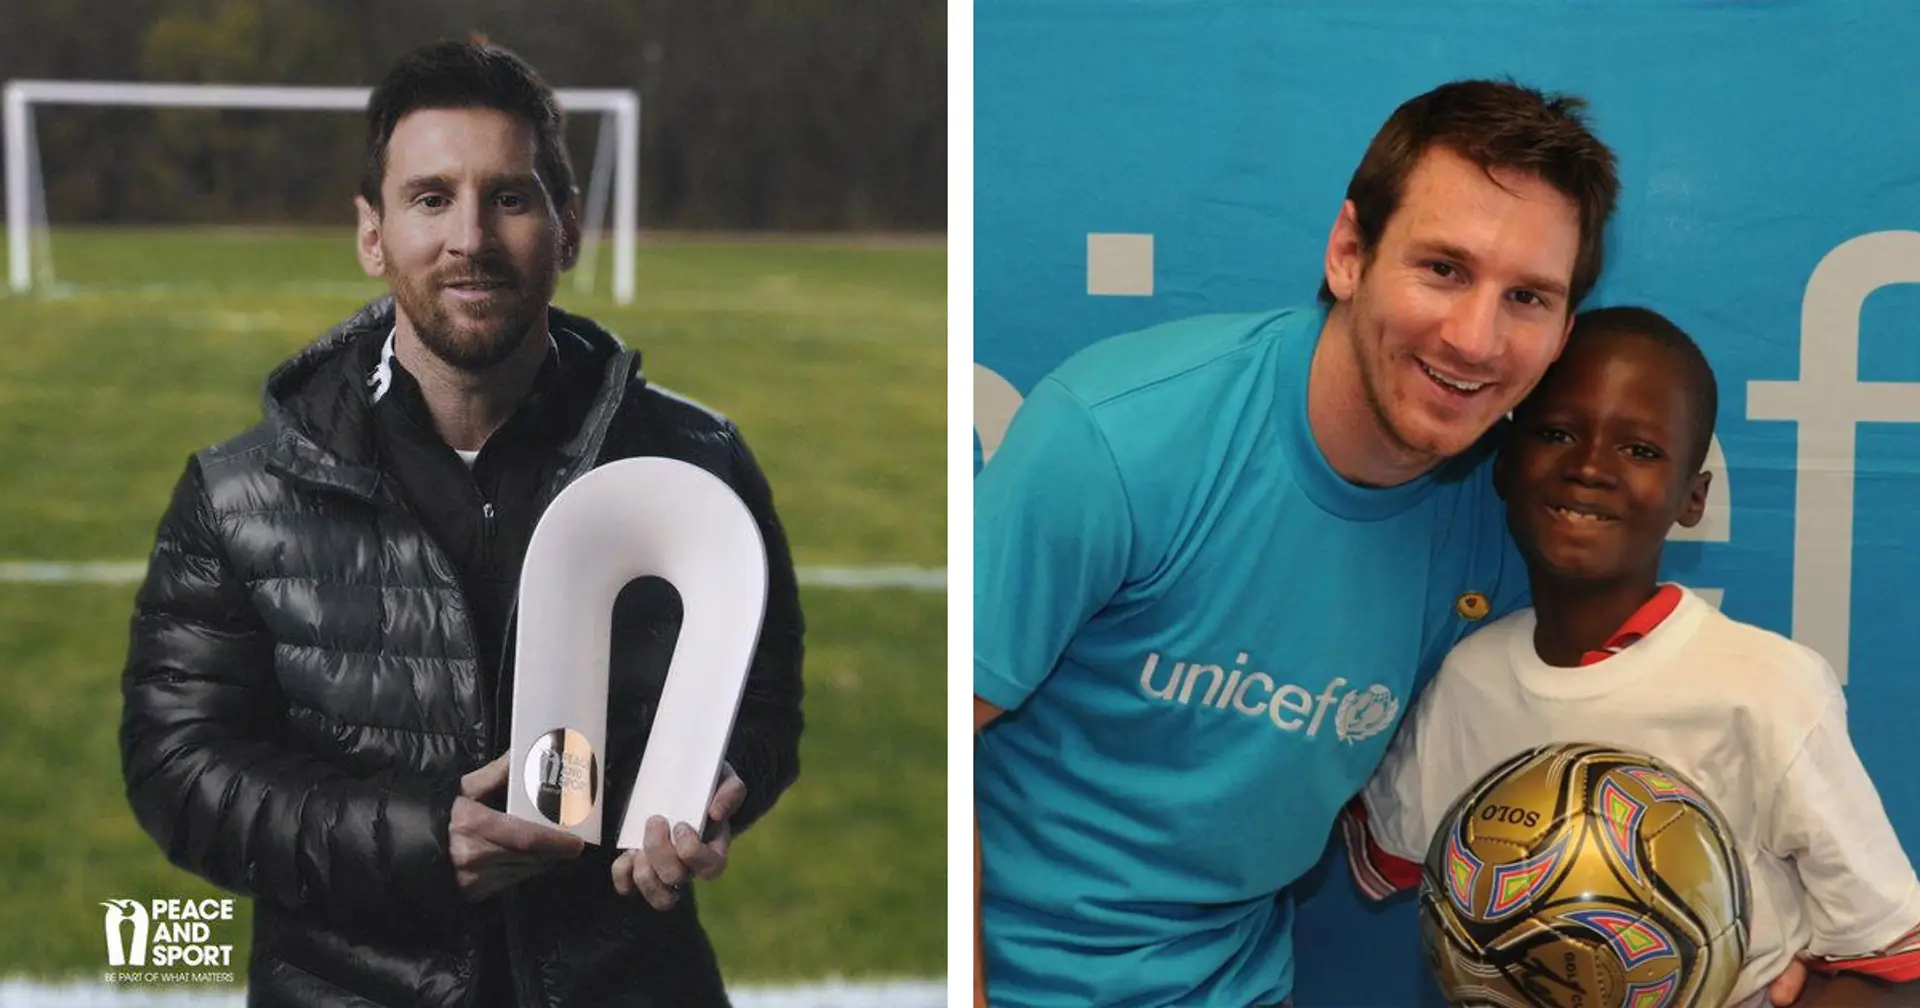 Champion for Peace, UNICEF Goodwill Ambassador and more: 5 off-the-pitch awards and distinctions Leo Messi has